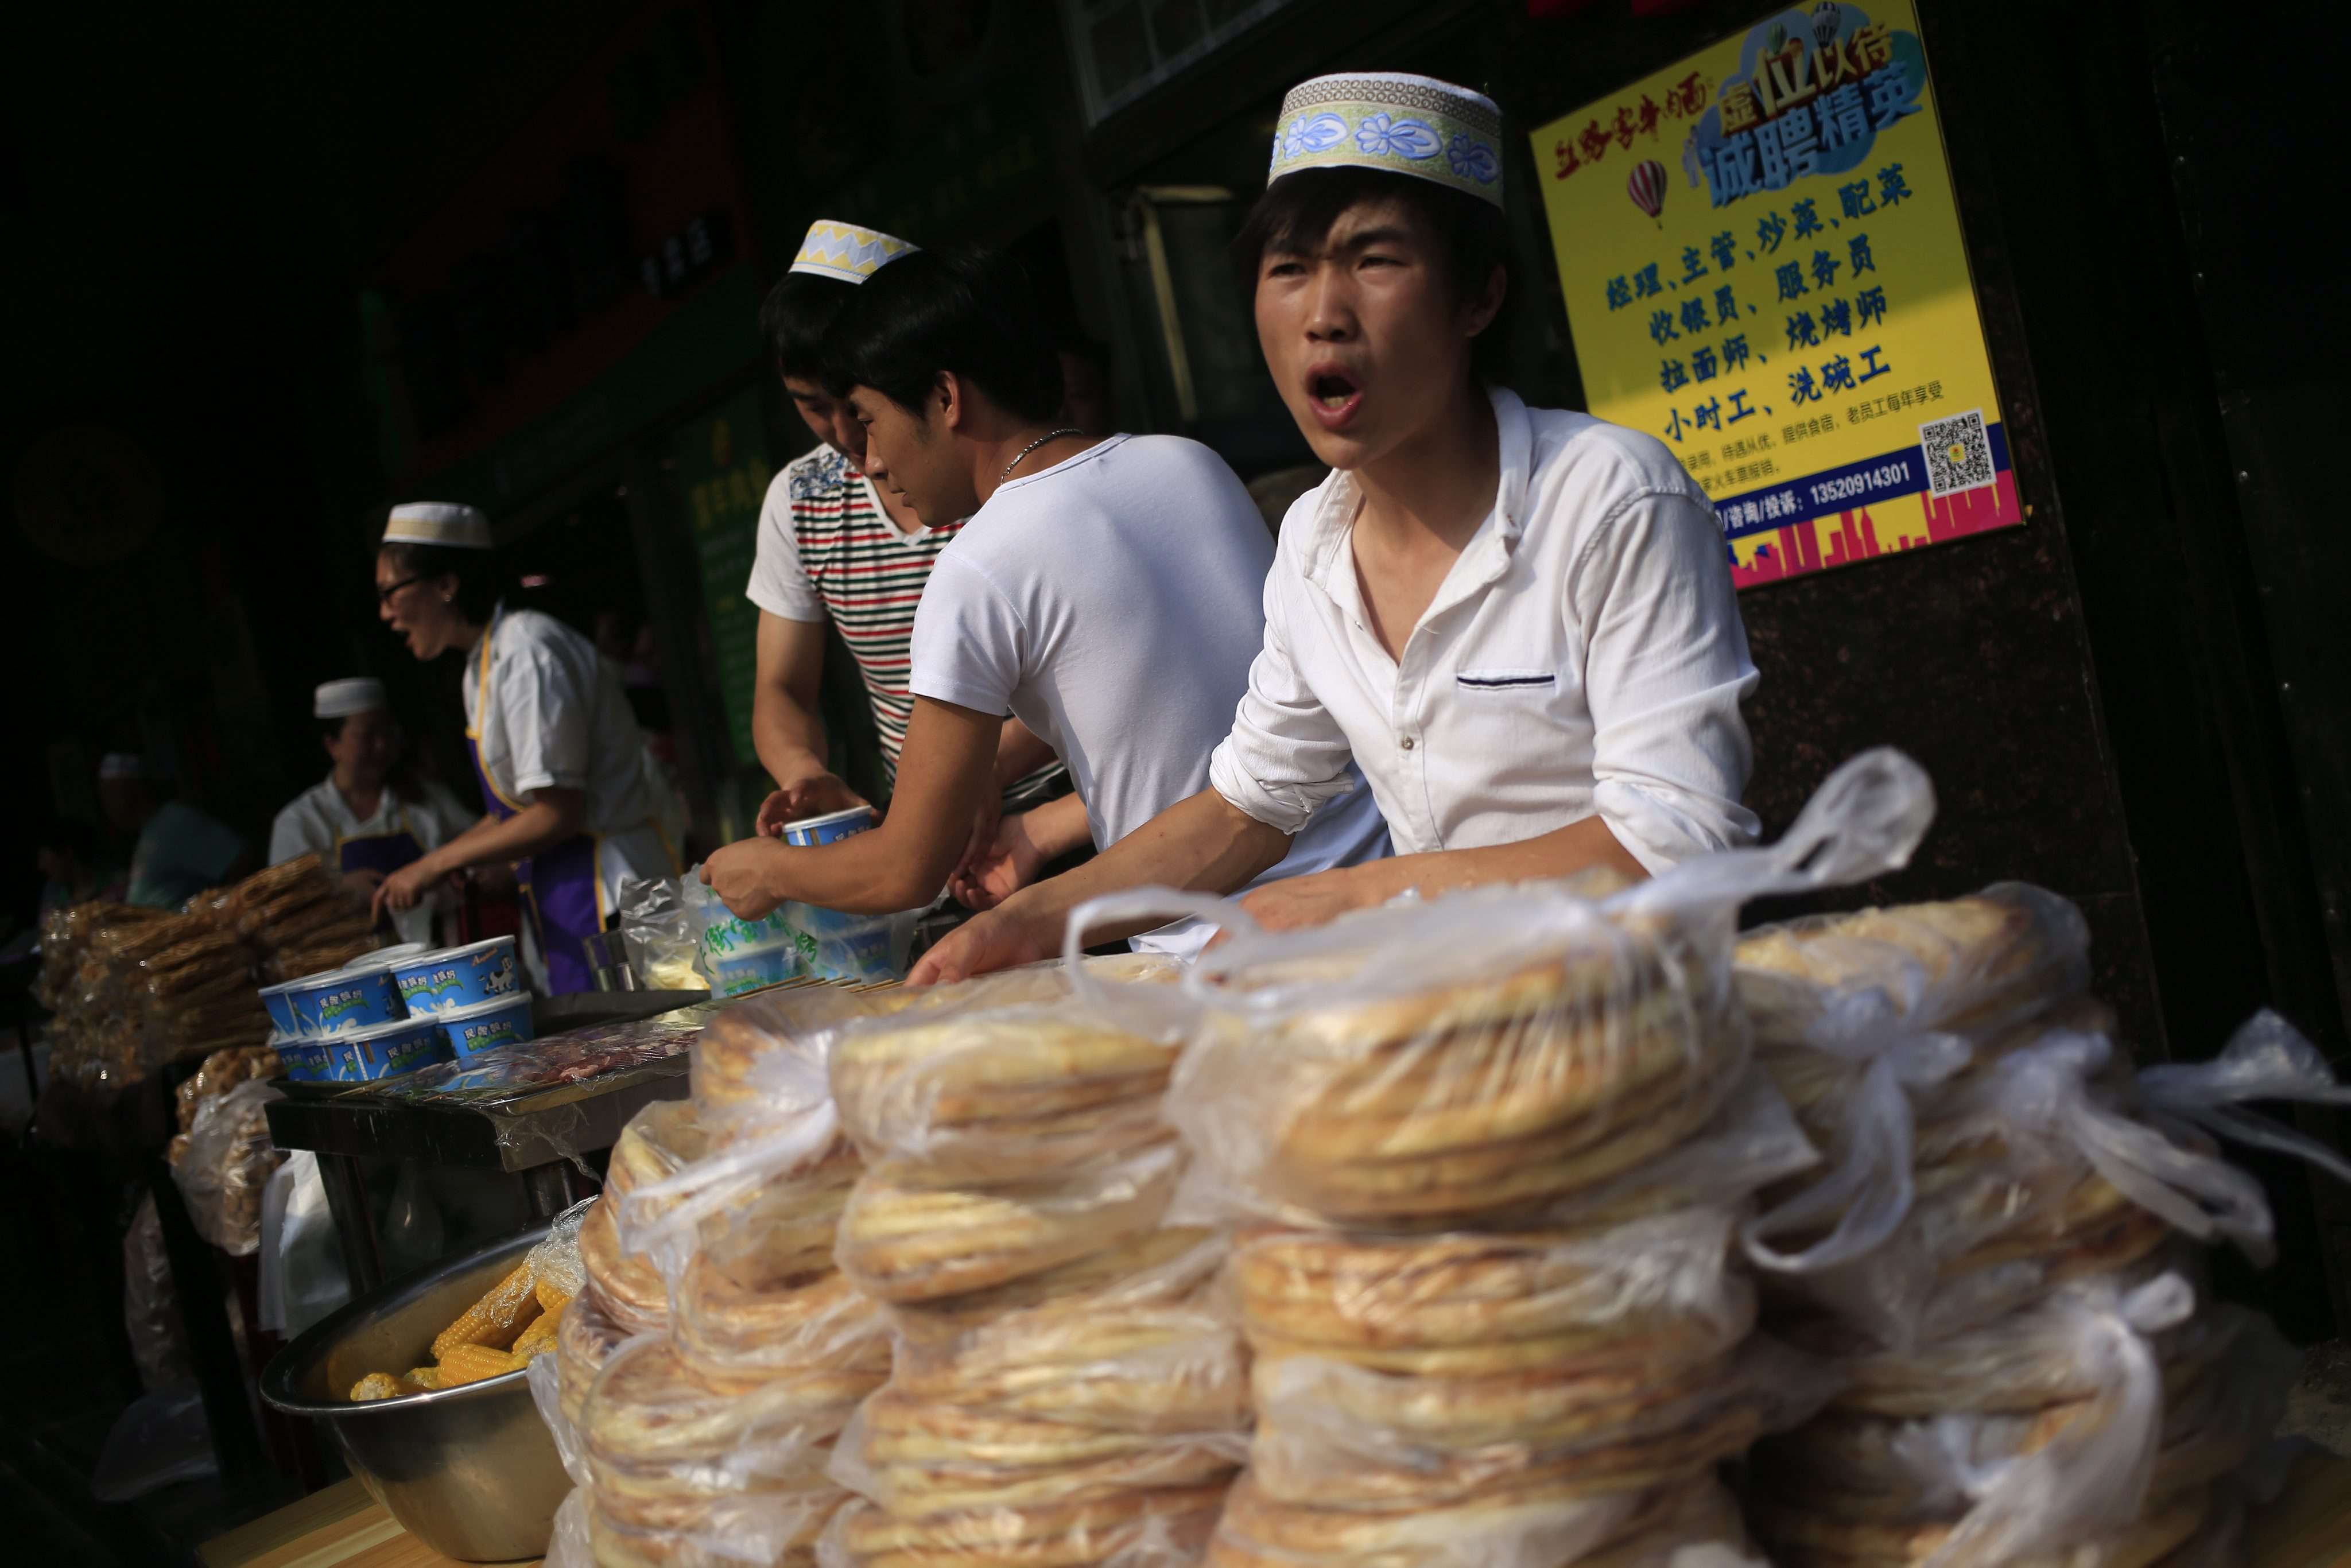 Muslim food vendors sell their goods outside the Niujie Mosque in Beijing during celebrations for the Eid ul-Fitr festival. Photo: EPA